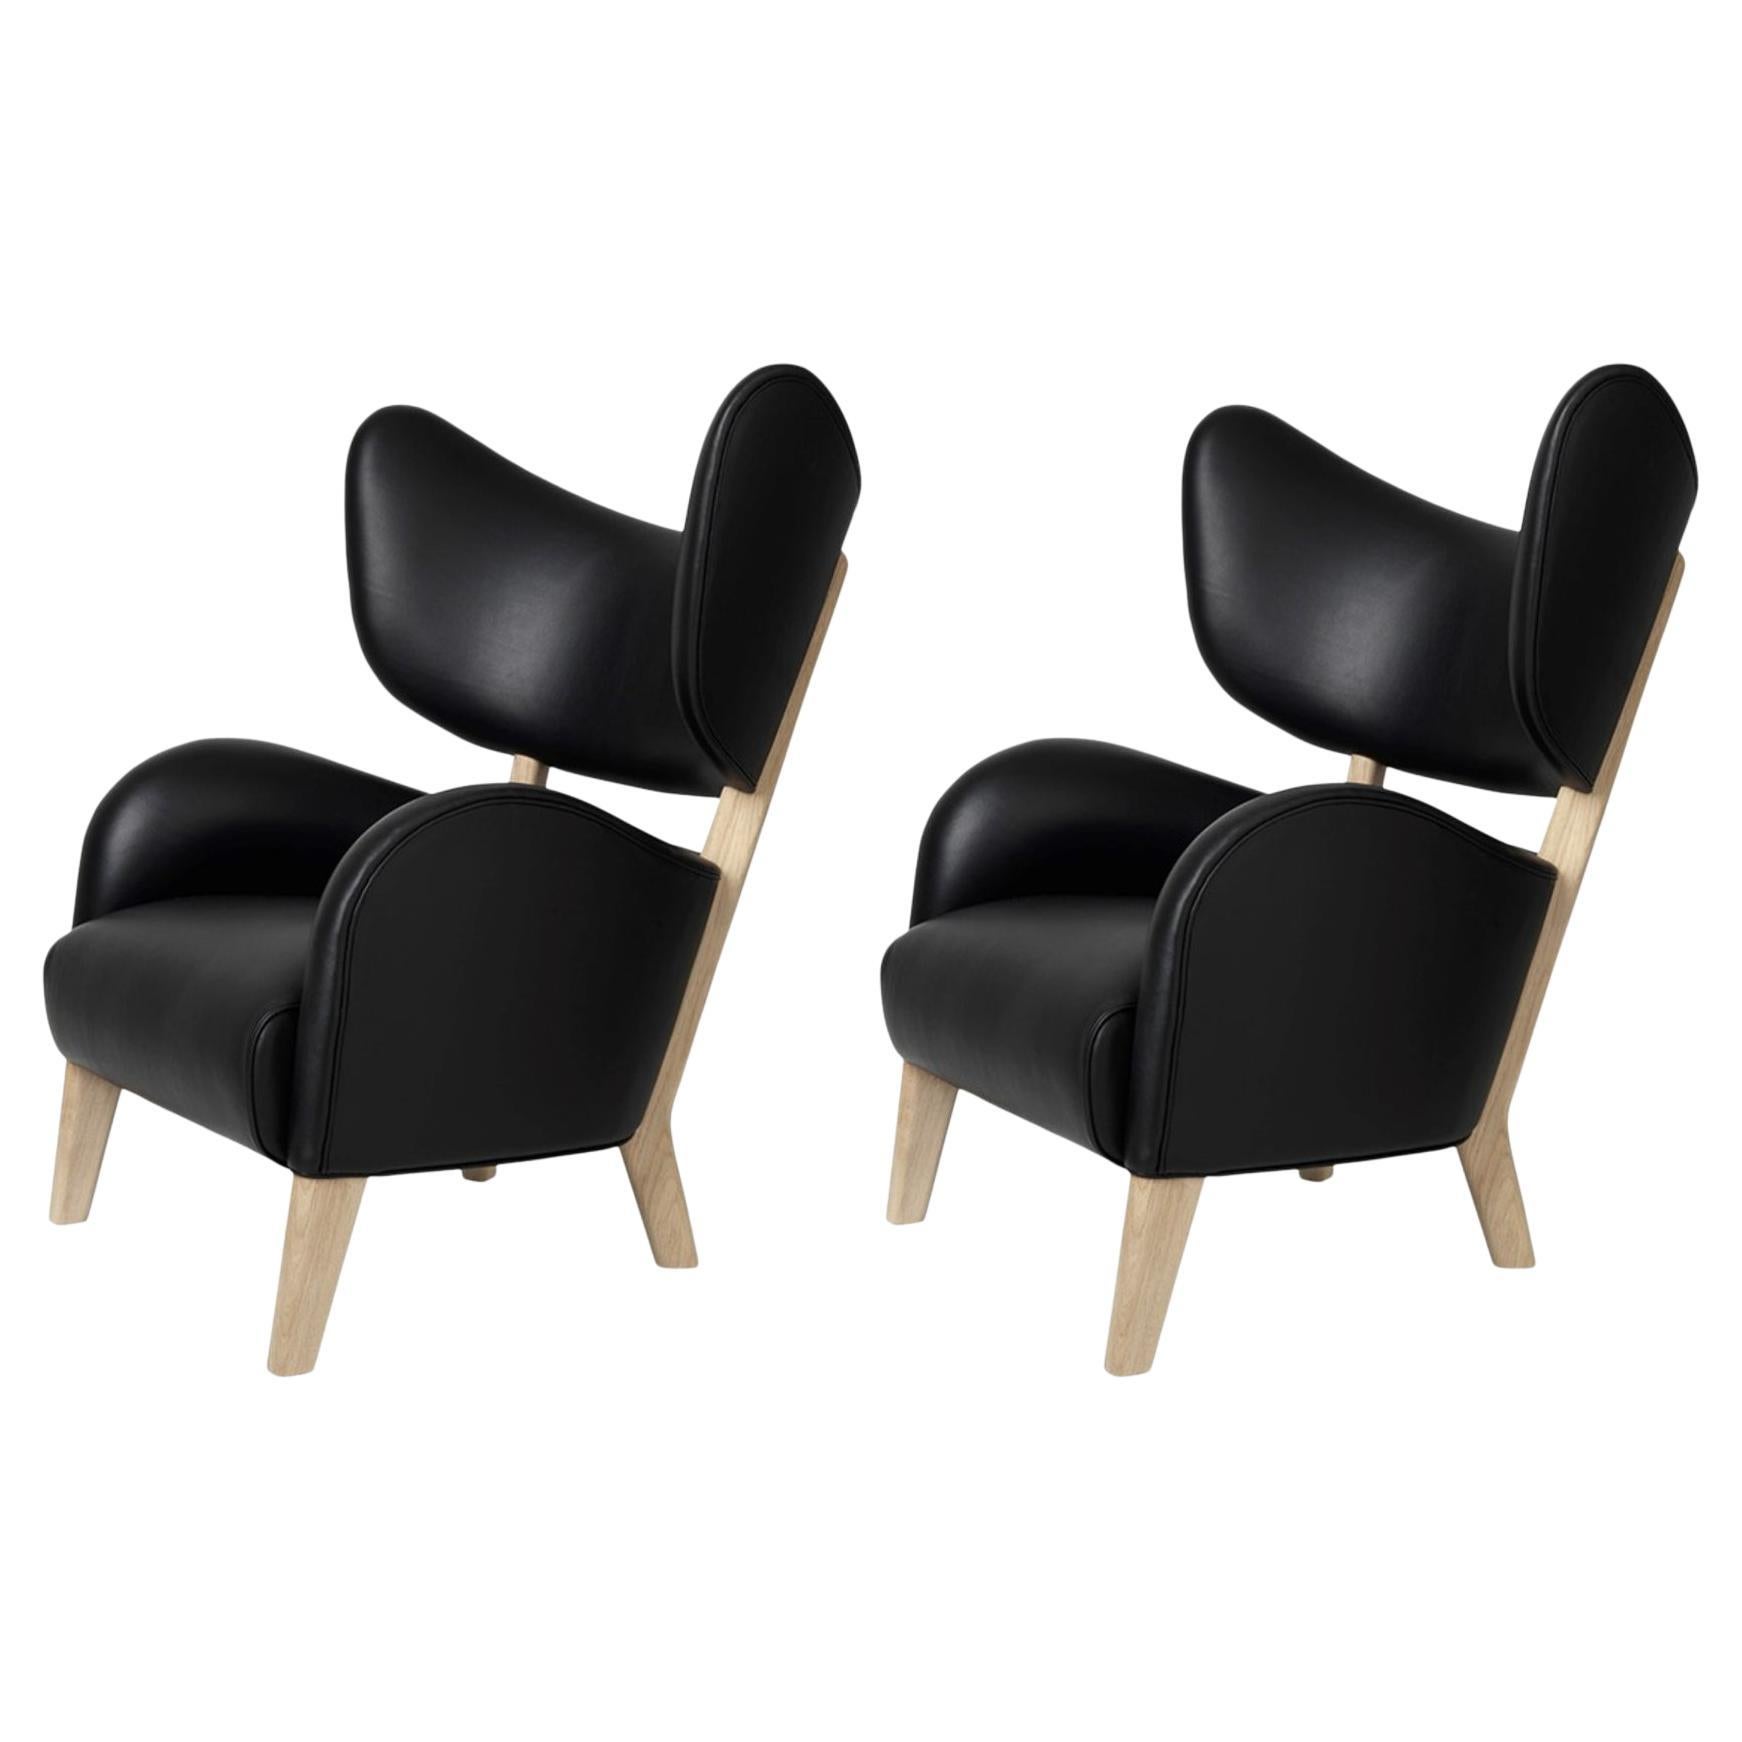 Set of 2 Black Leather Natural Oak My Own Chair Lounge Chairs by Lassen